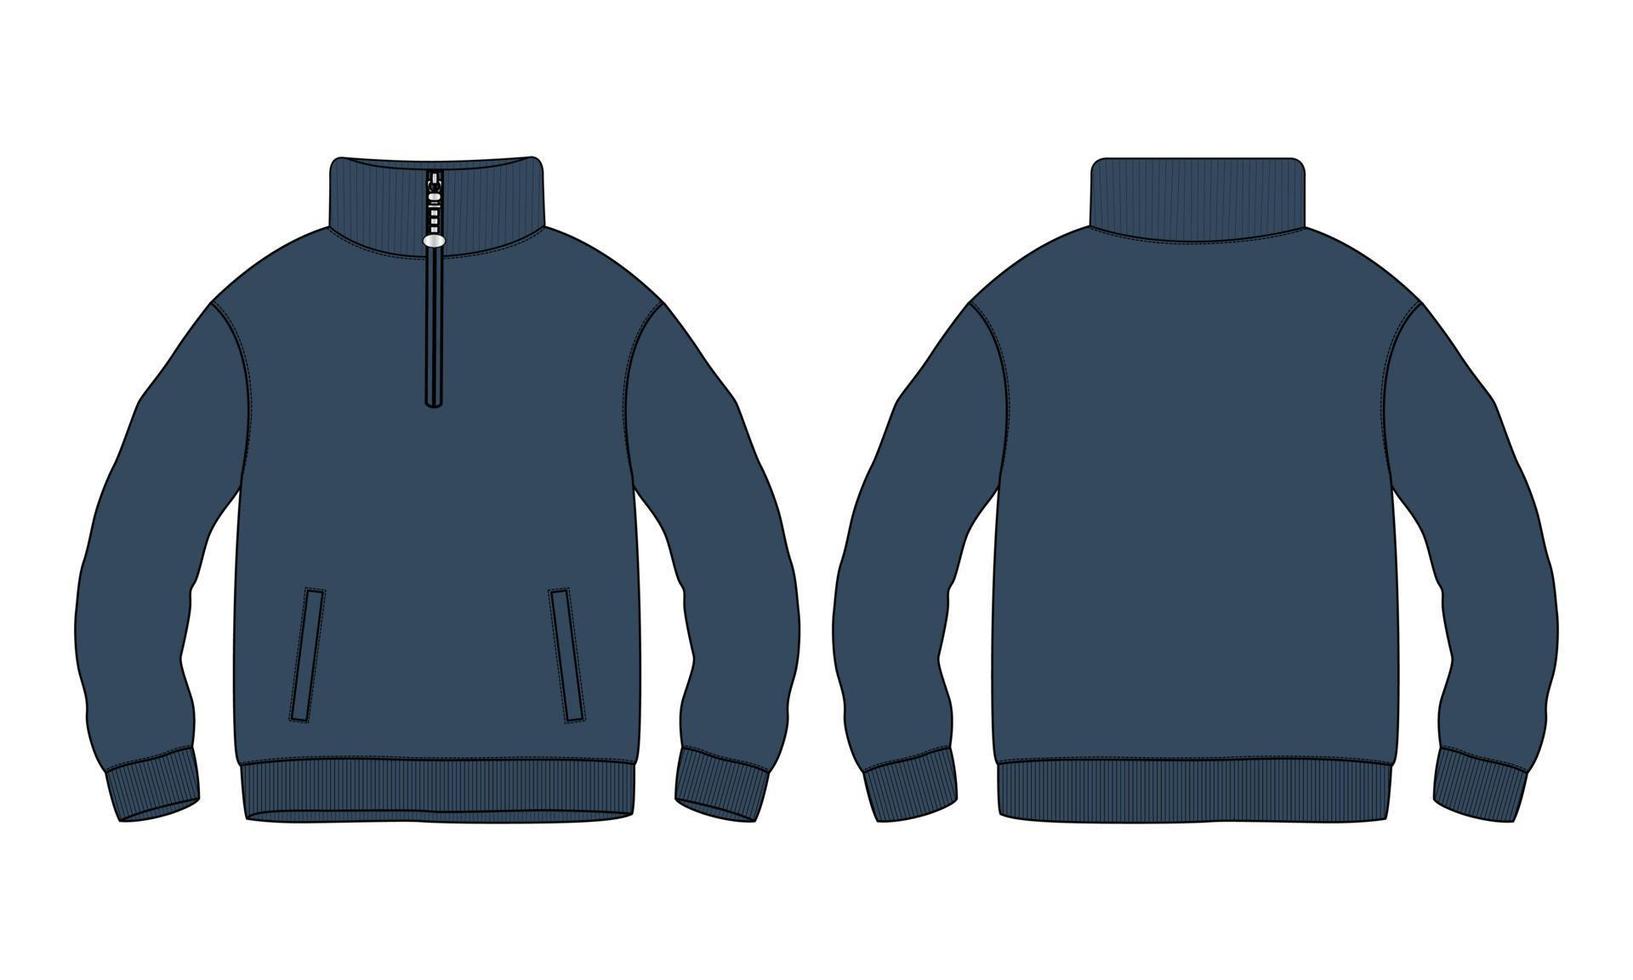 Cotton jersey fleece jacket Sweatshirt technical fashion Flat sketch Vector illustration Navy blue Color template Front and back views. Flat apparel Sweater Jacket mock up Isolated on White